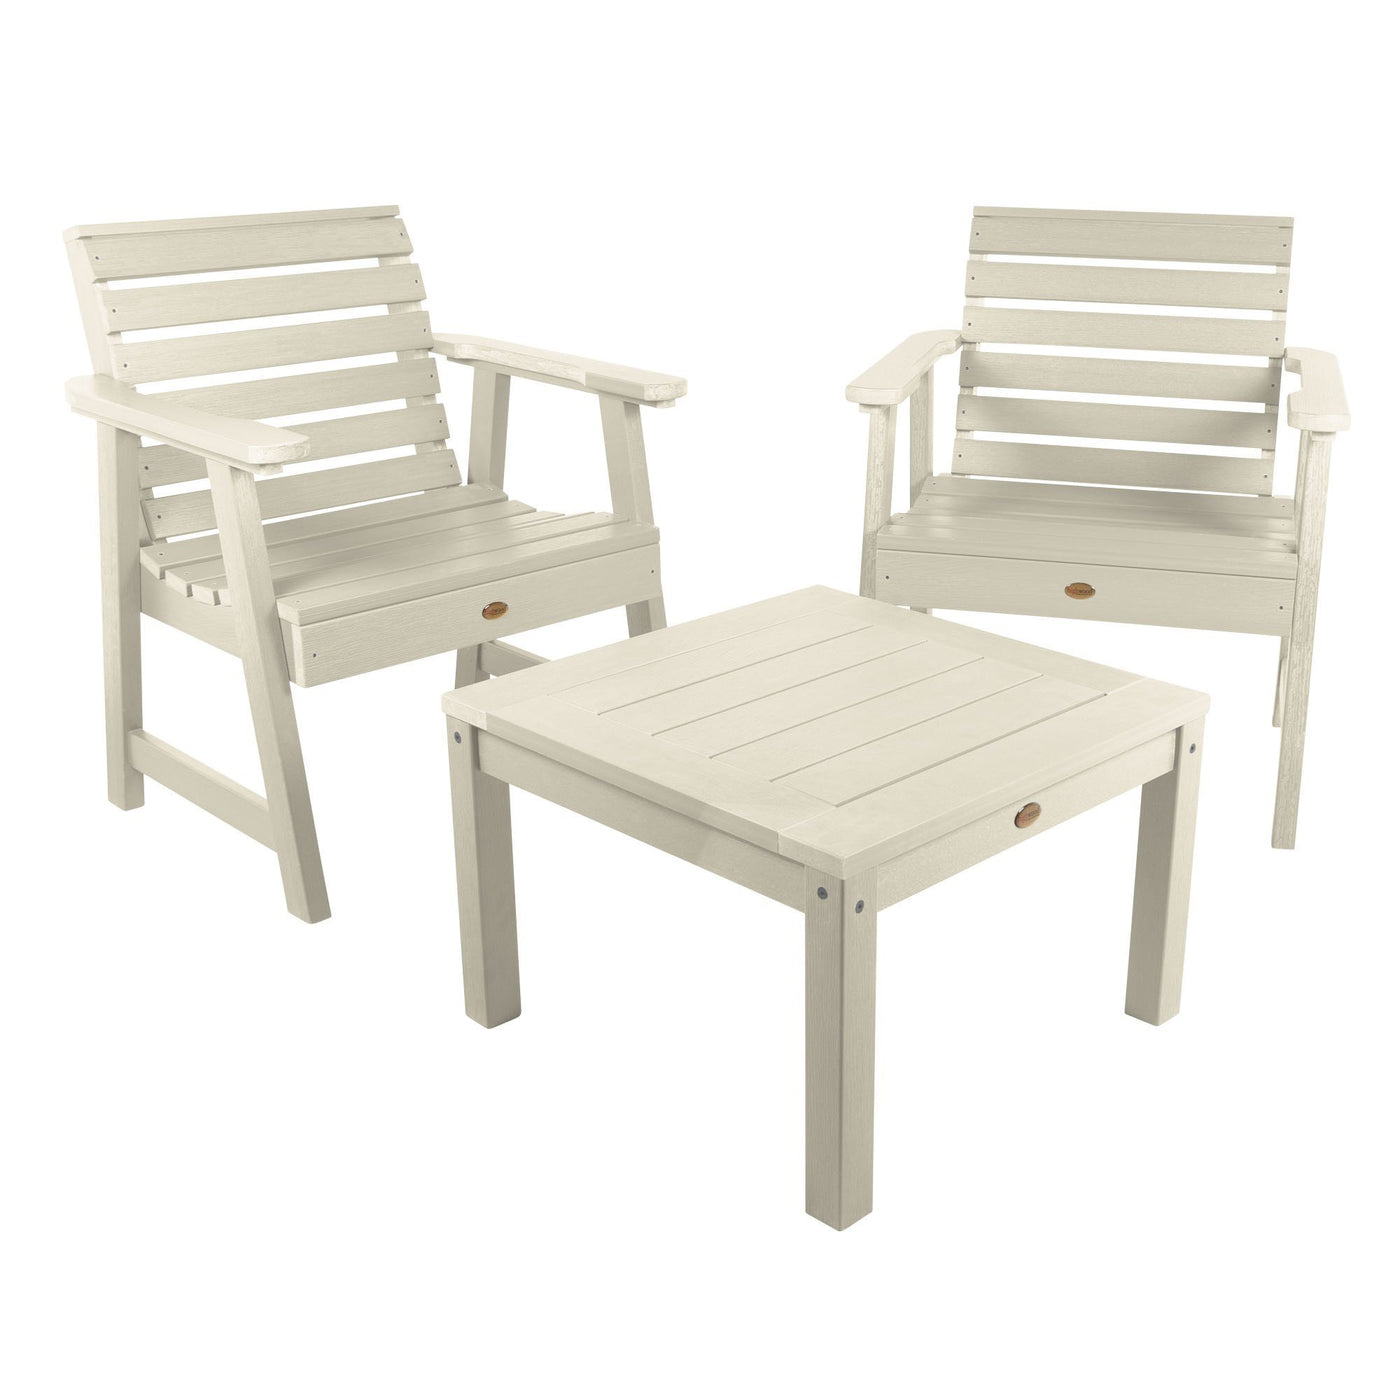 2 Weatherly Garden Chairs with 1 Square Side Table Highwood USA 